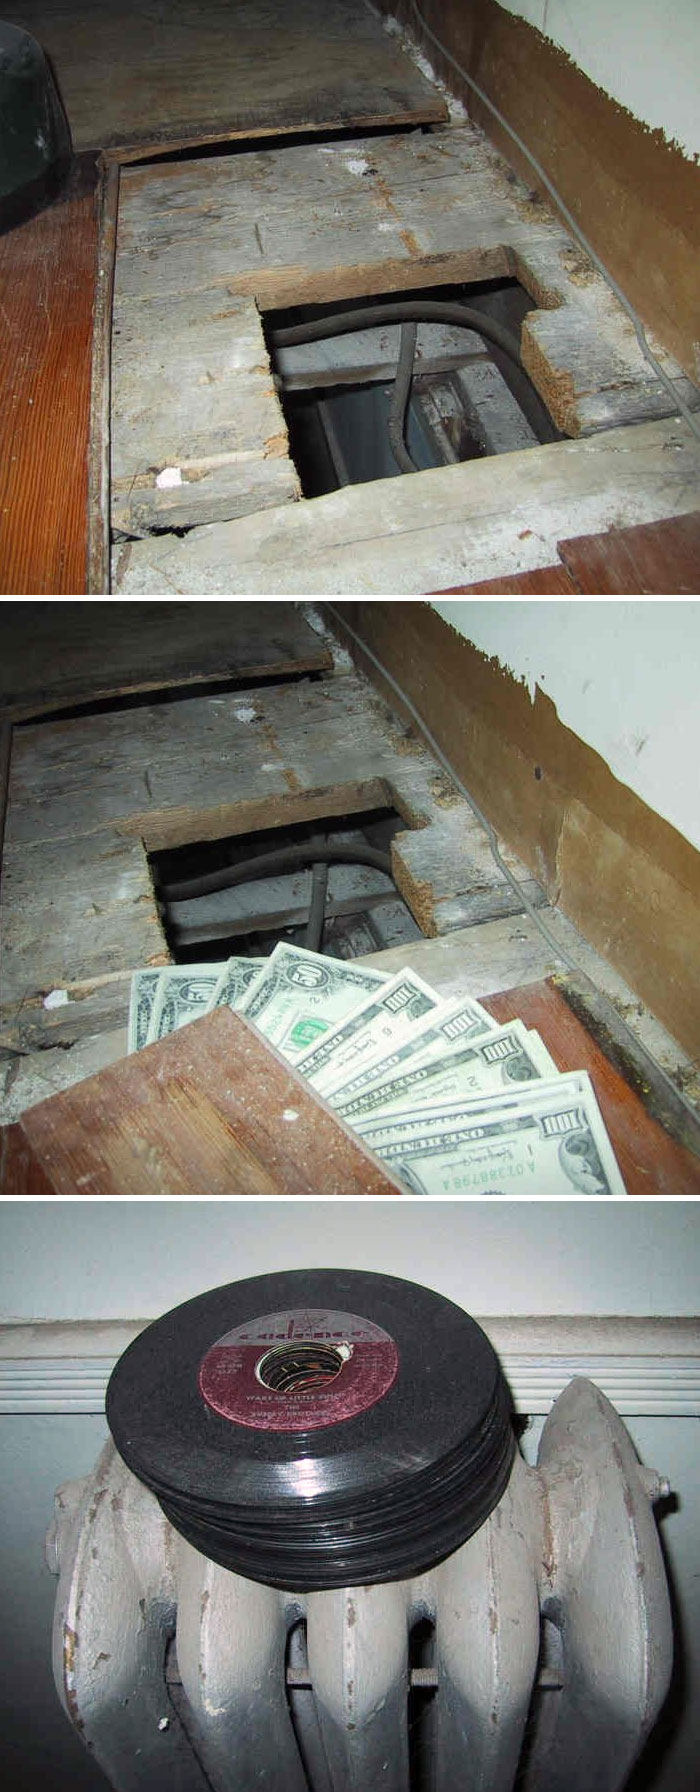 Here Are The Contents Of A Safe I Found In My 200-Year-Old House